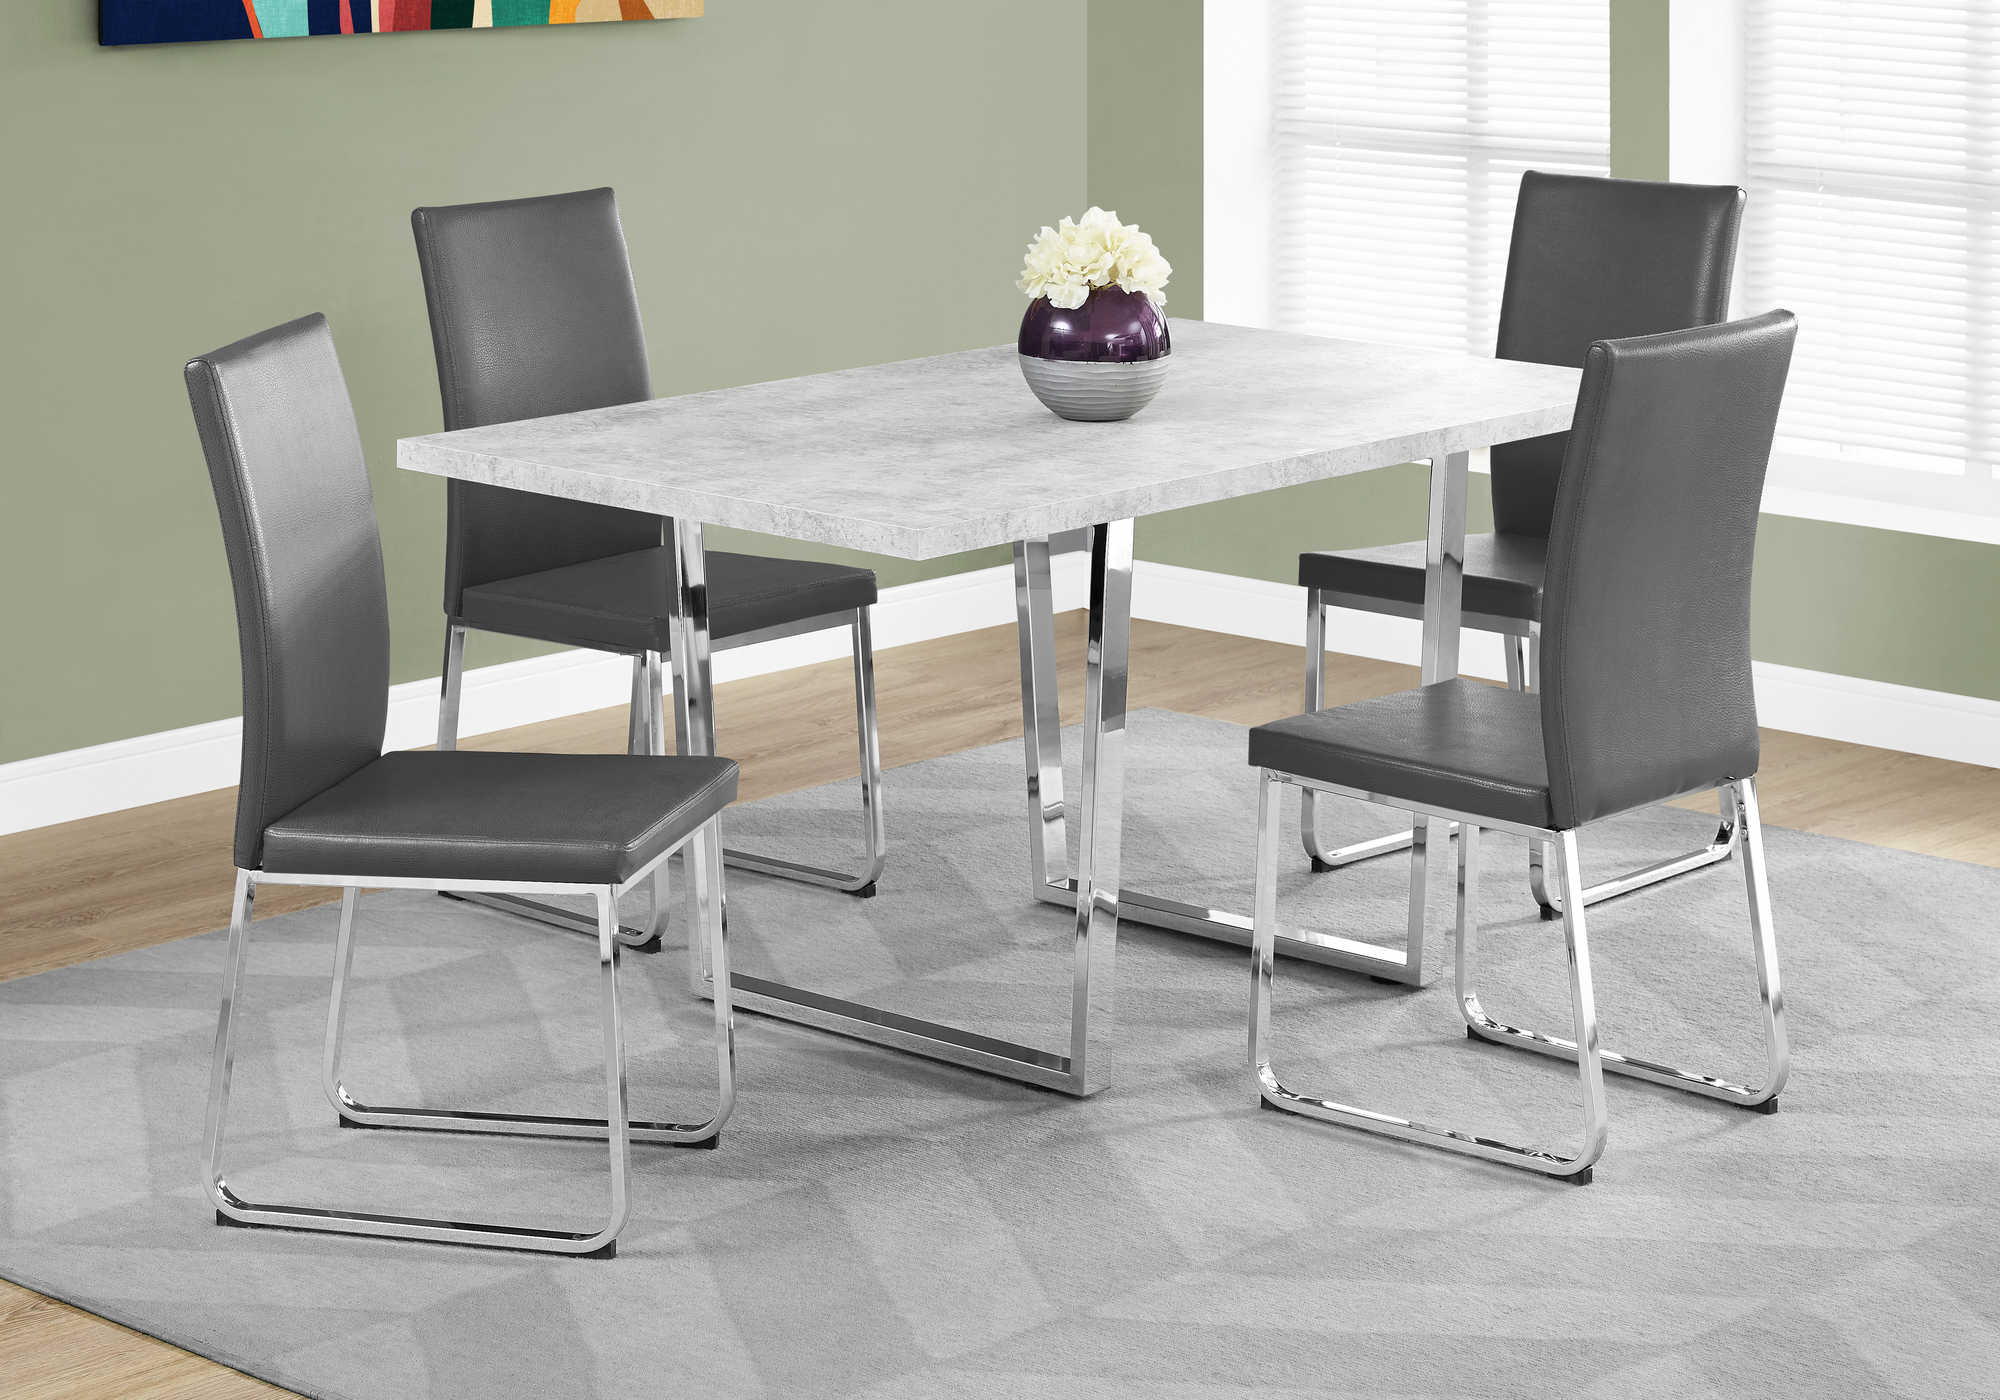 DINING CHAIR - 2PCS / 38"H / GREY LEATHER-LOOK / CHROME